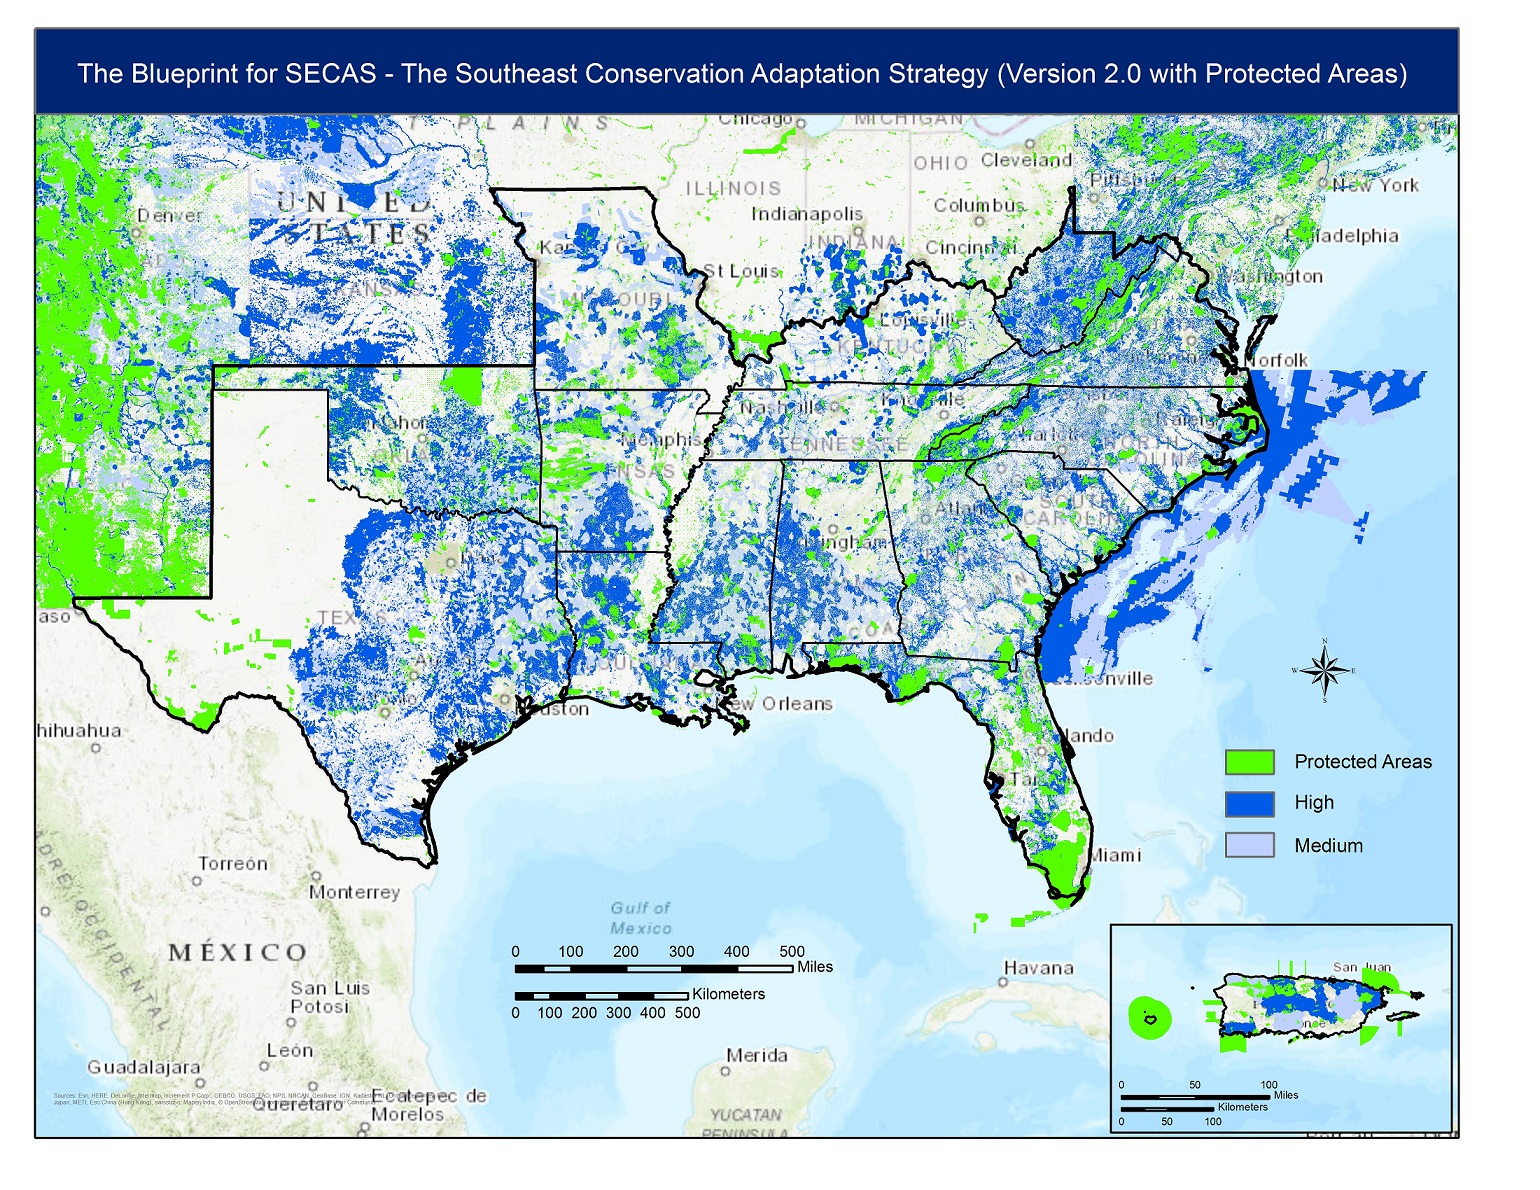 Map of Version 2.0 of the Southeast Conservation Blueprint showing high value areas in dark blue, medium value areas in light blue, and protected areas in green.